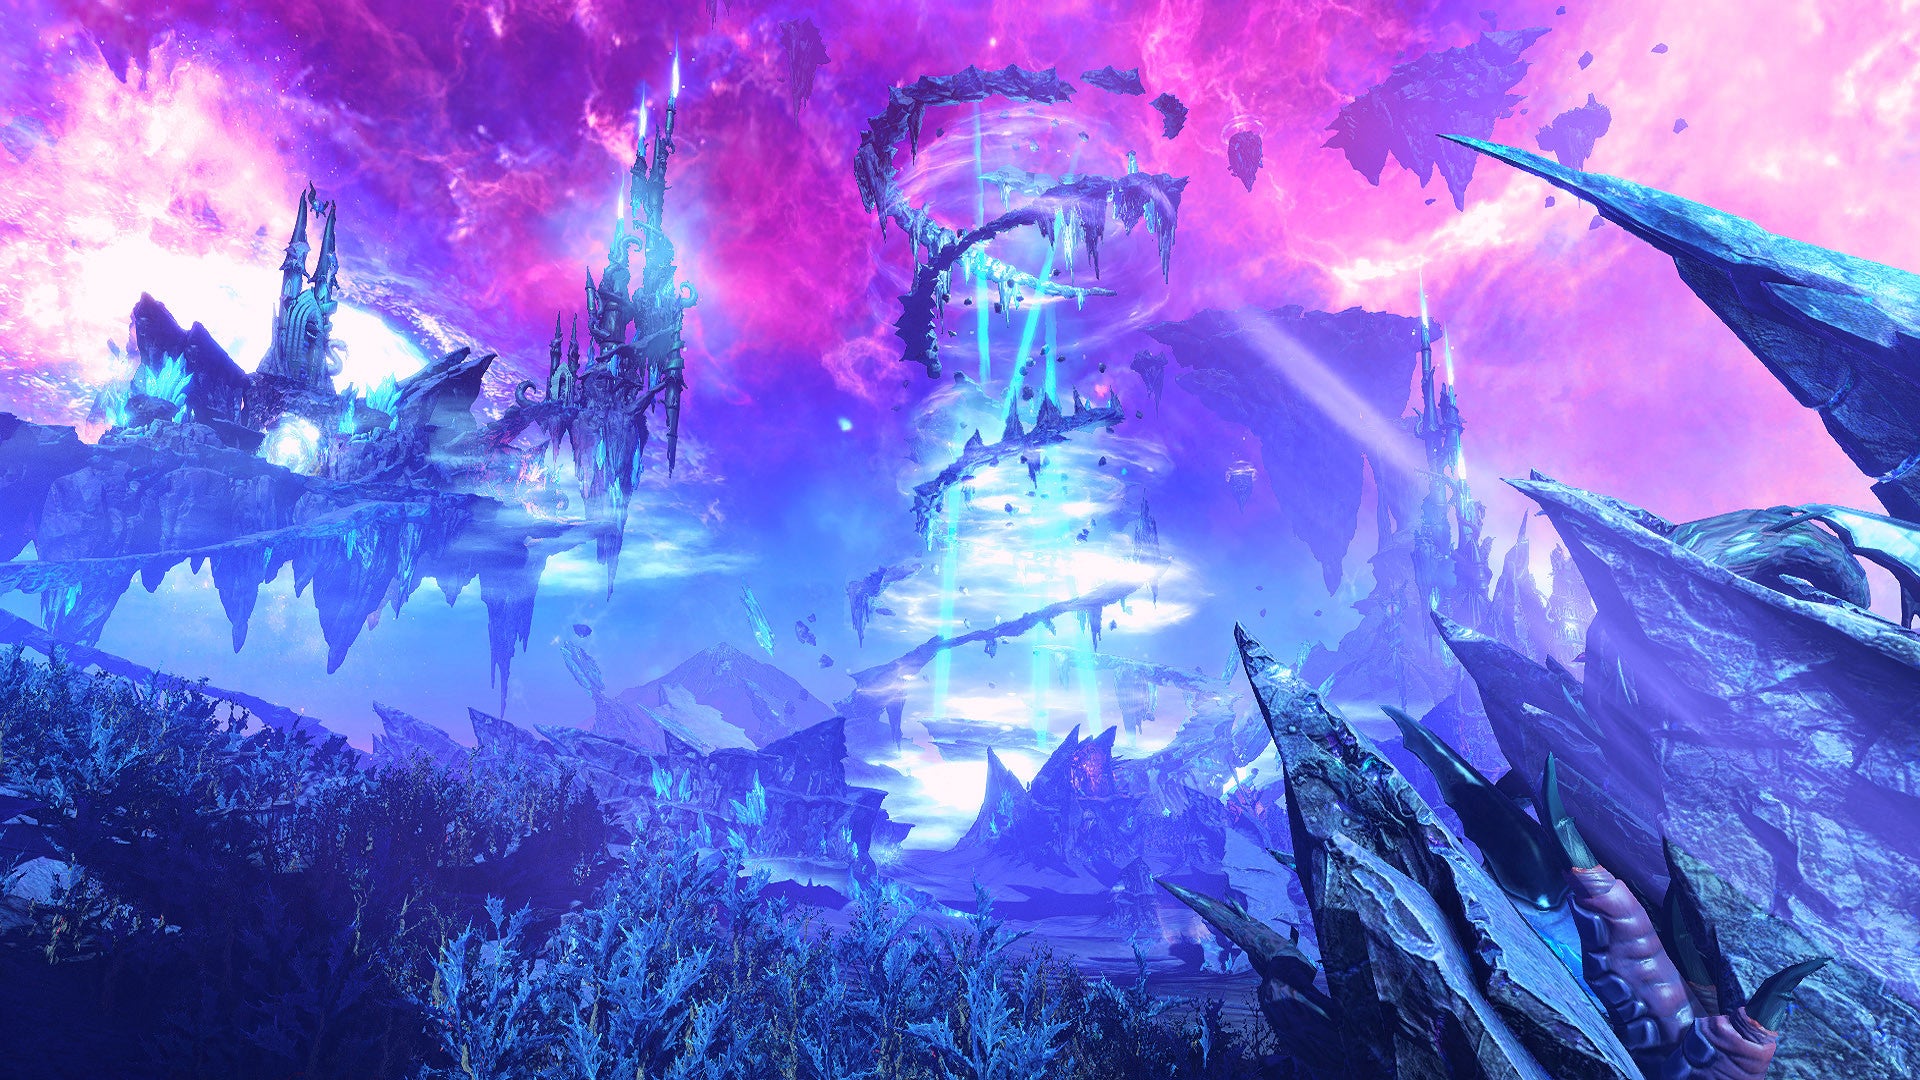 2022 best games Total War Warhammer 3 - a blue-purple landscape with jagged rocks in front of a great light blue column of magic and a bright pink sky